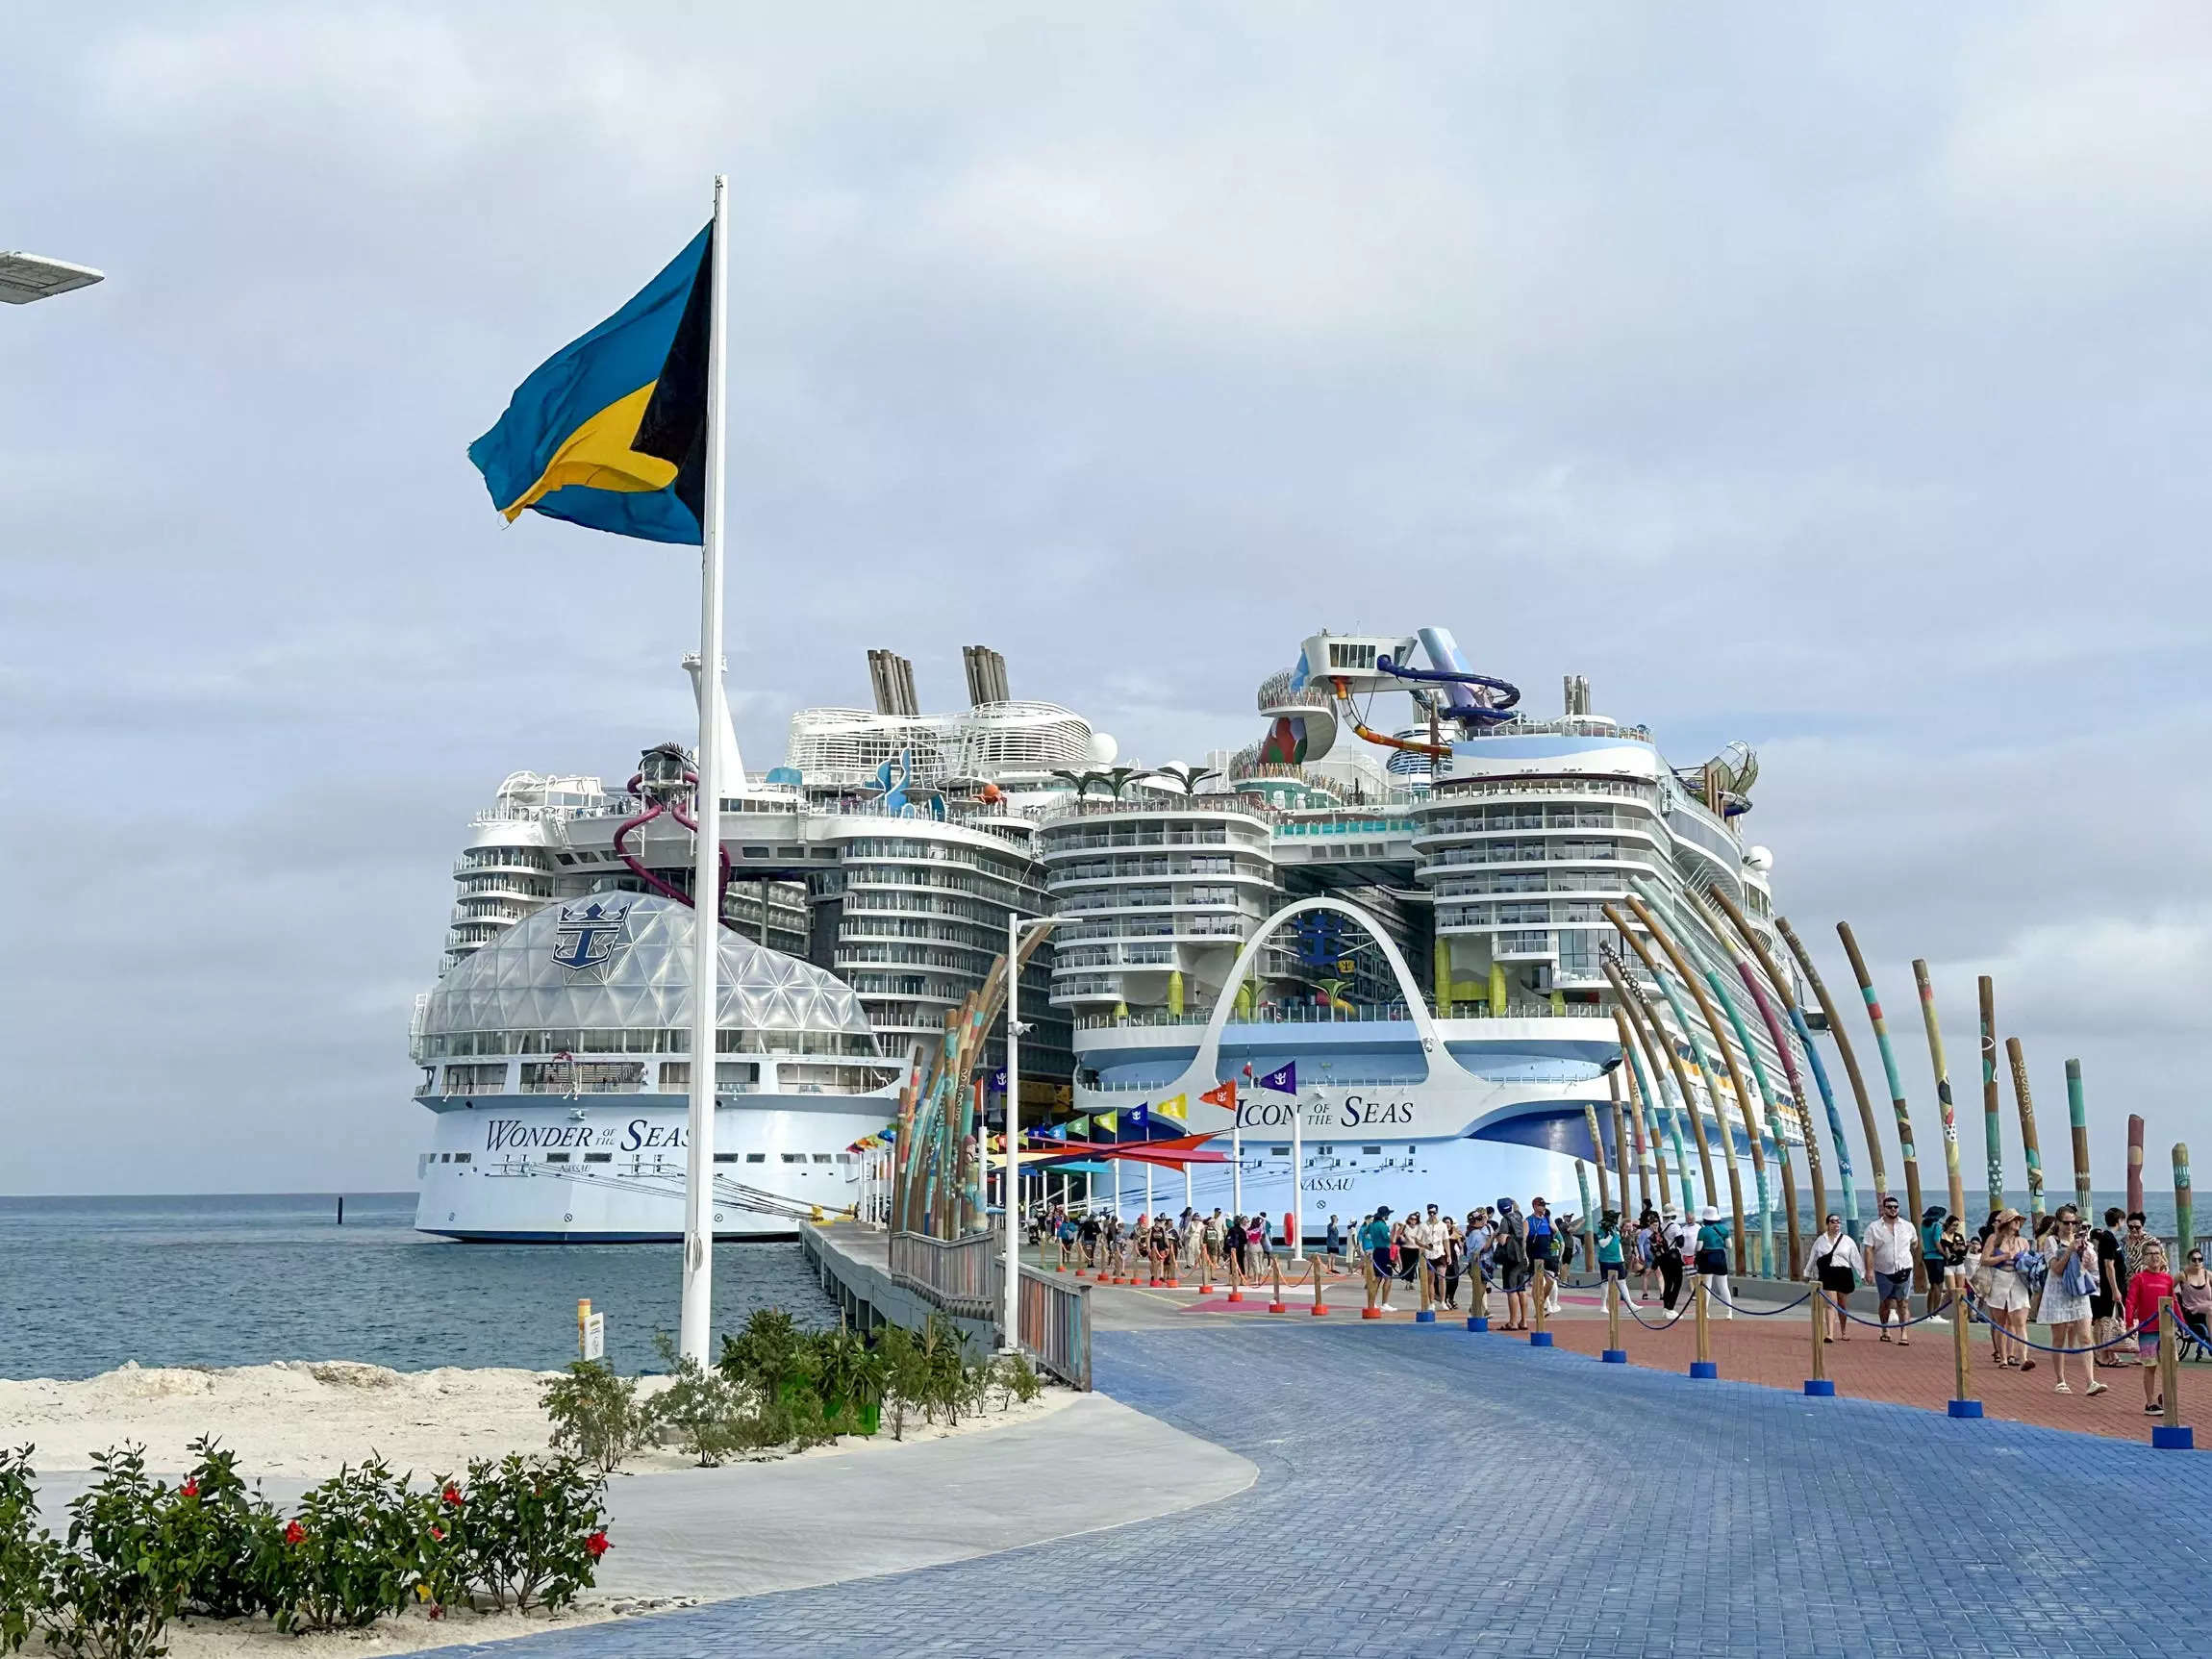 Icon of the Seas and Wonder of the Seas at Perfect Day in CocoCay